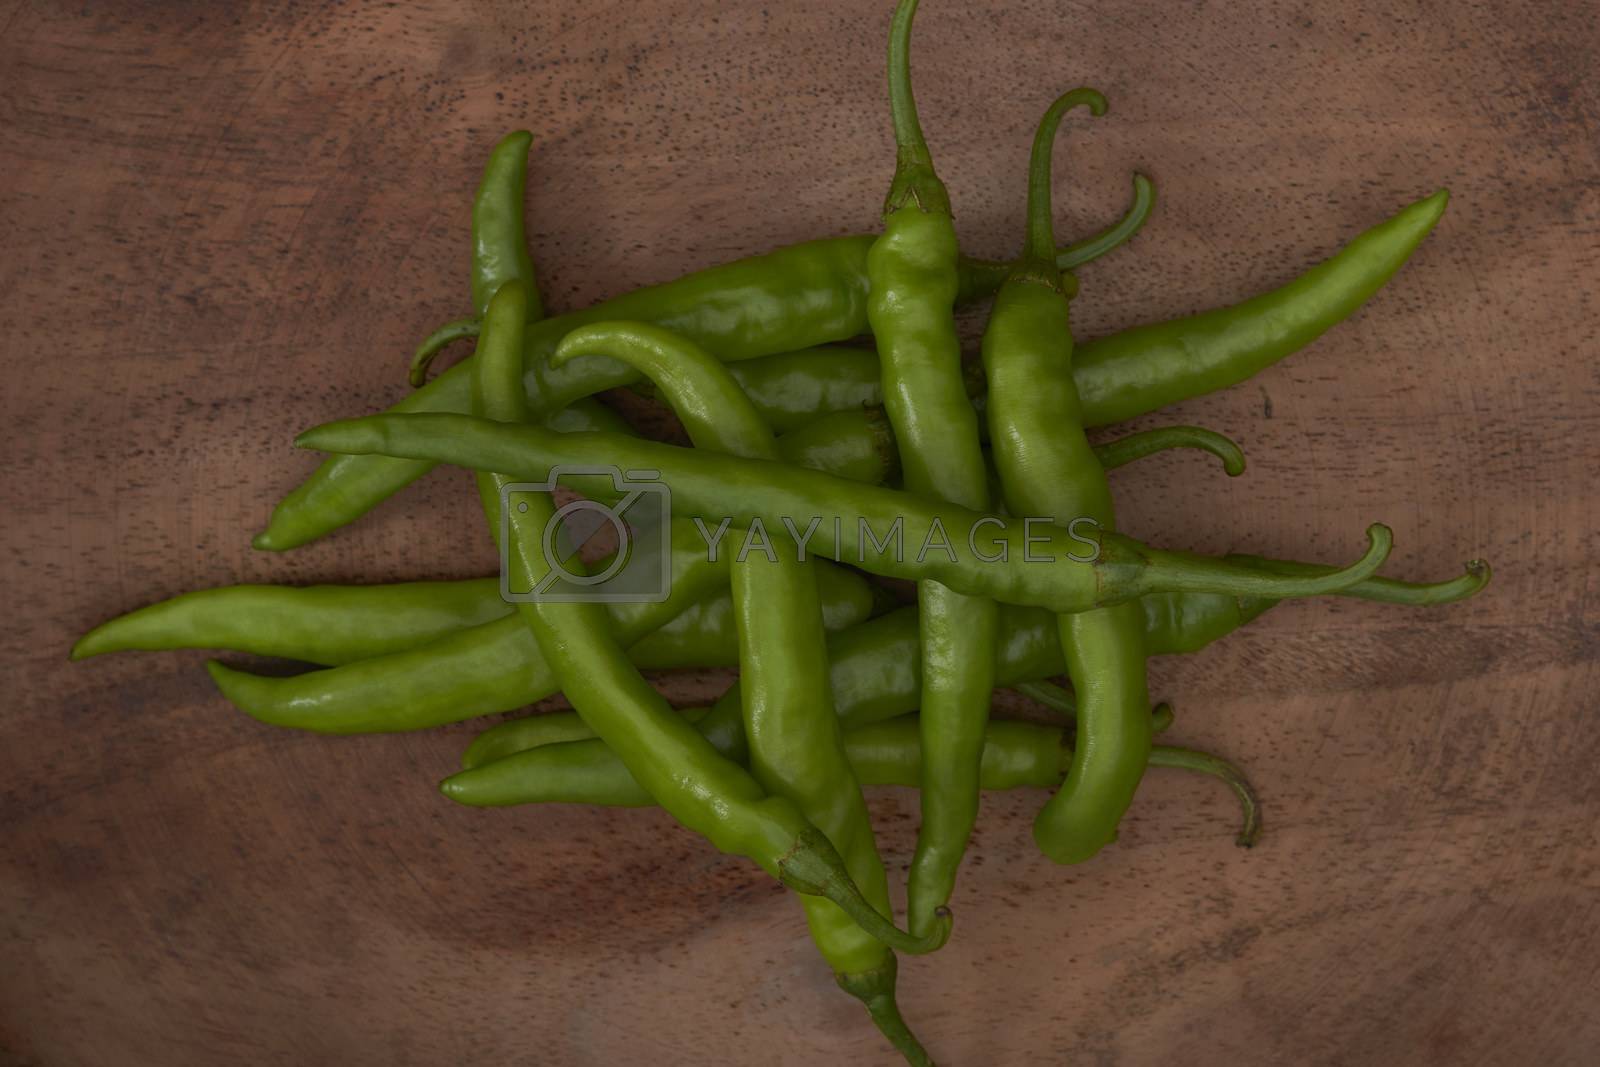 Royalty free image of Fresh green chillies on a wooden tray by vinodpillai